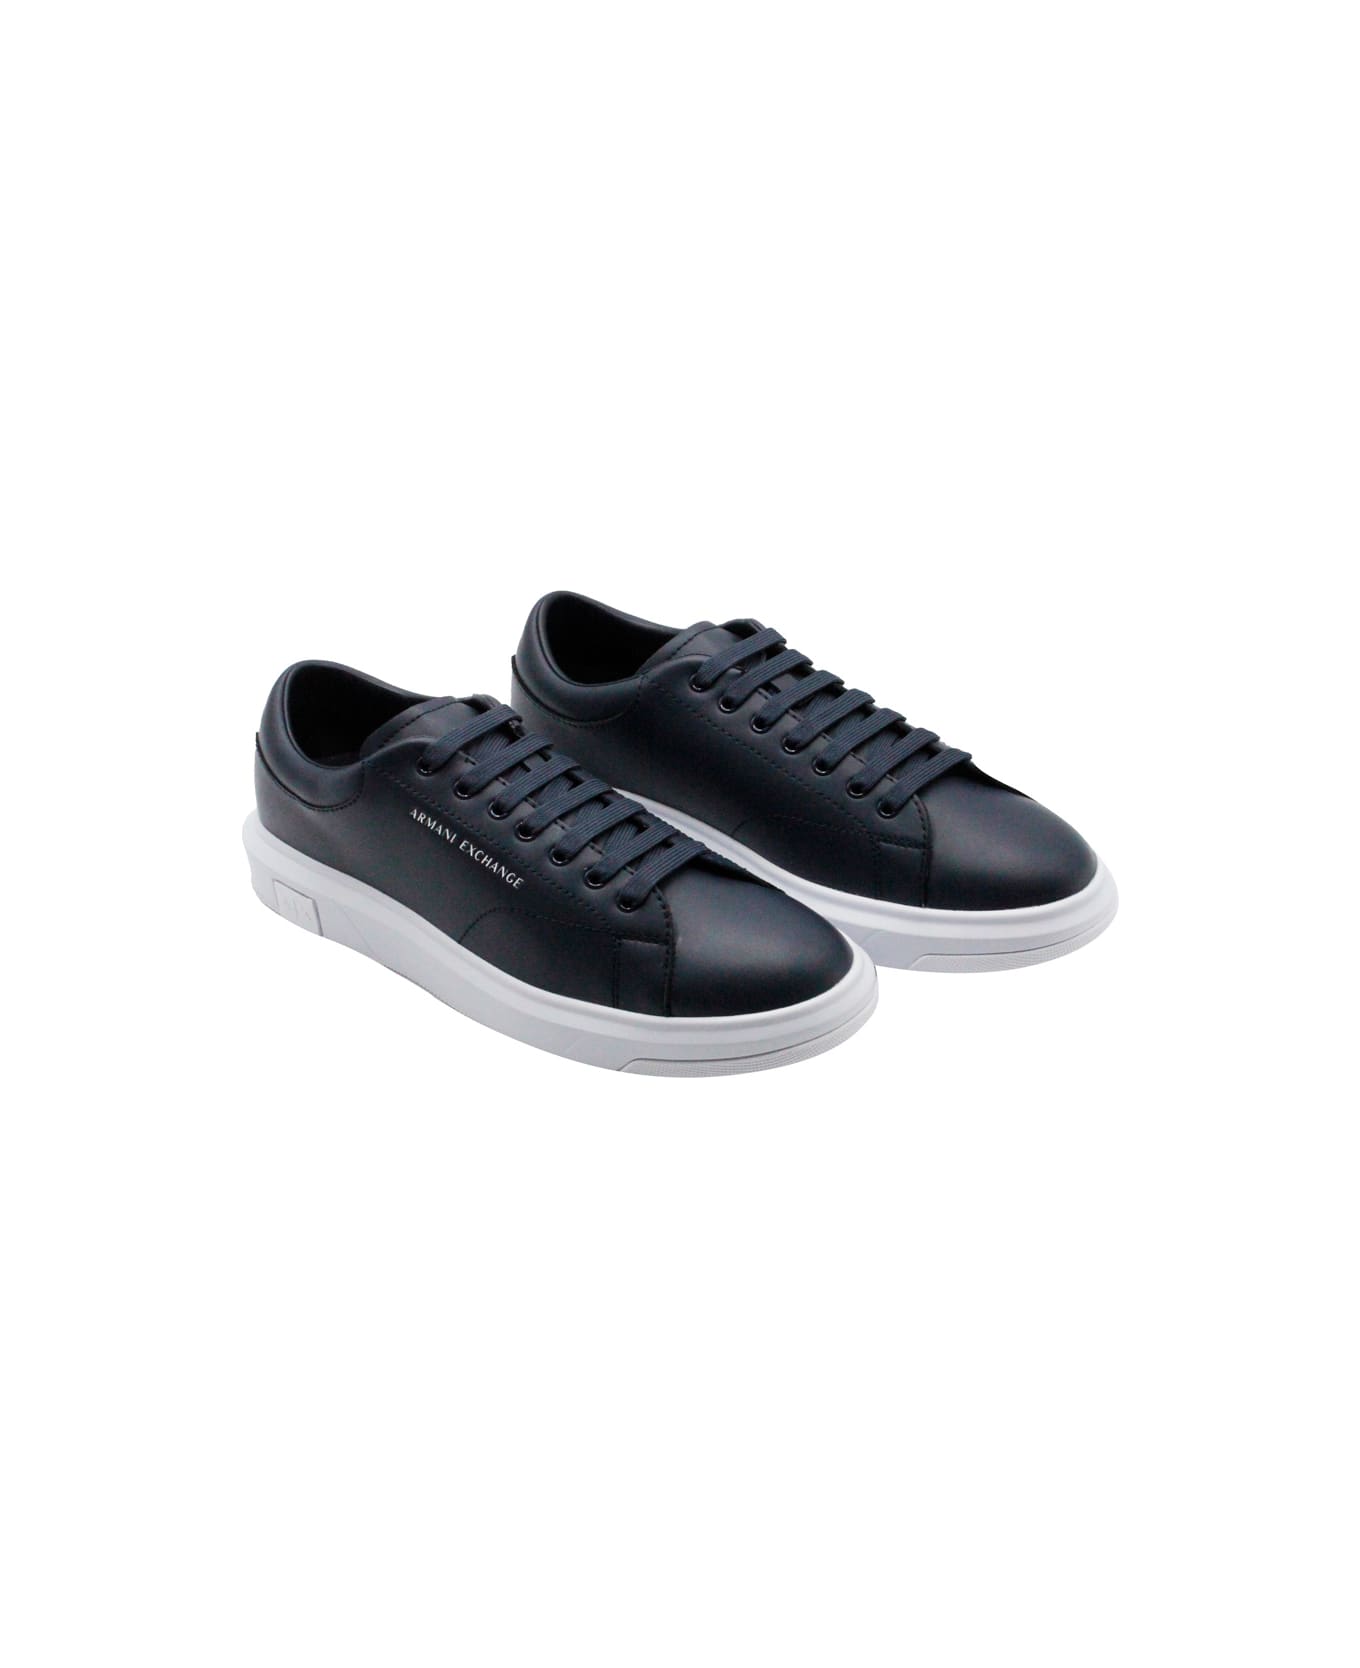 Armani Collezioni Leather Sneakers With Matching Box Sole And Lace Closure. Small Logo On The Tongue And Back - Blu スニーカー